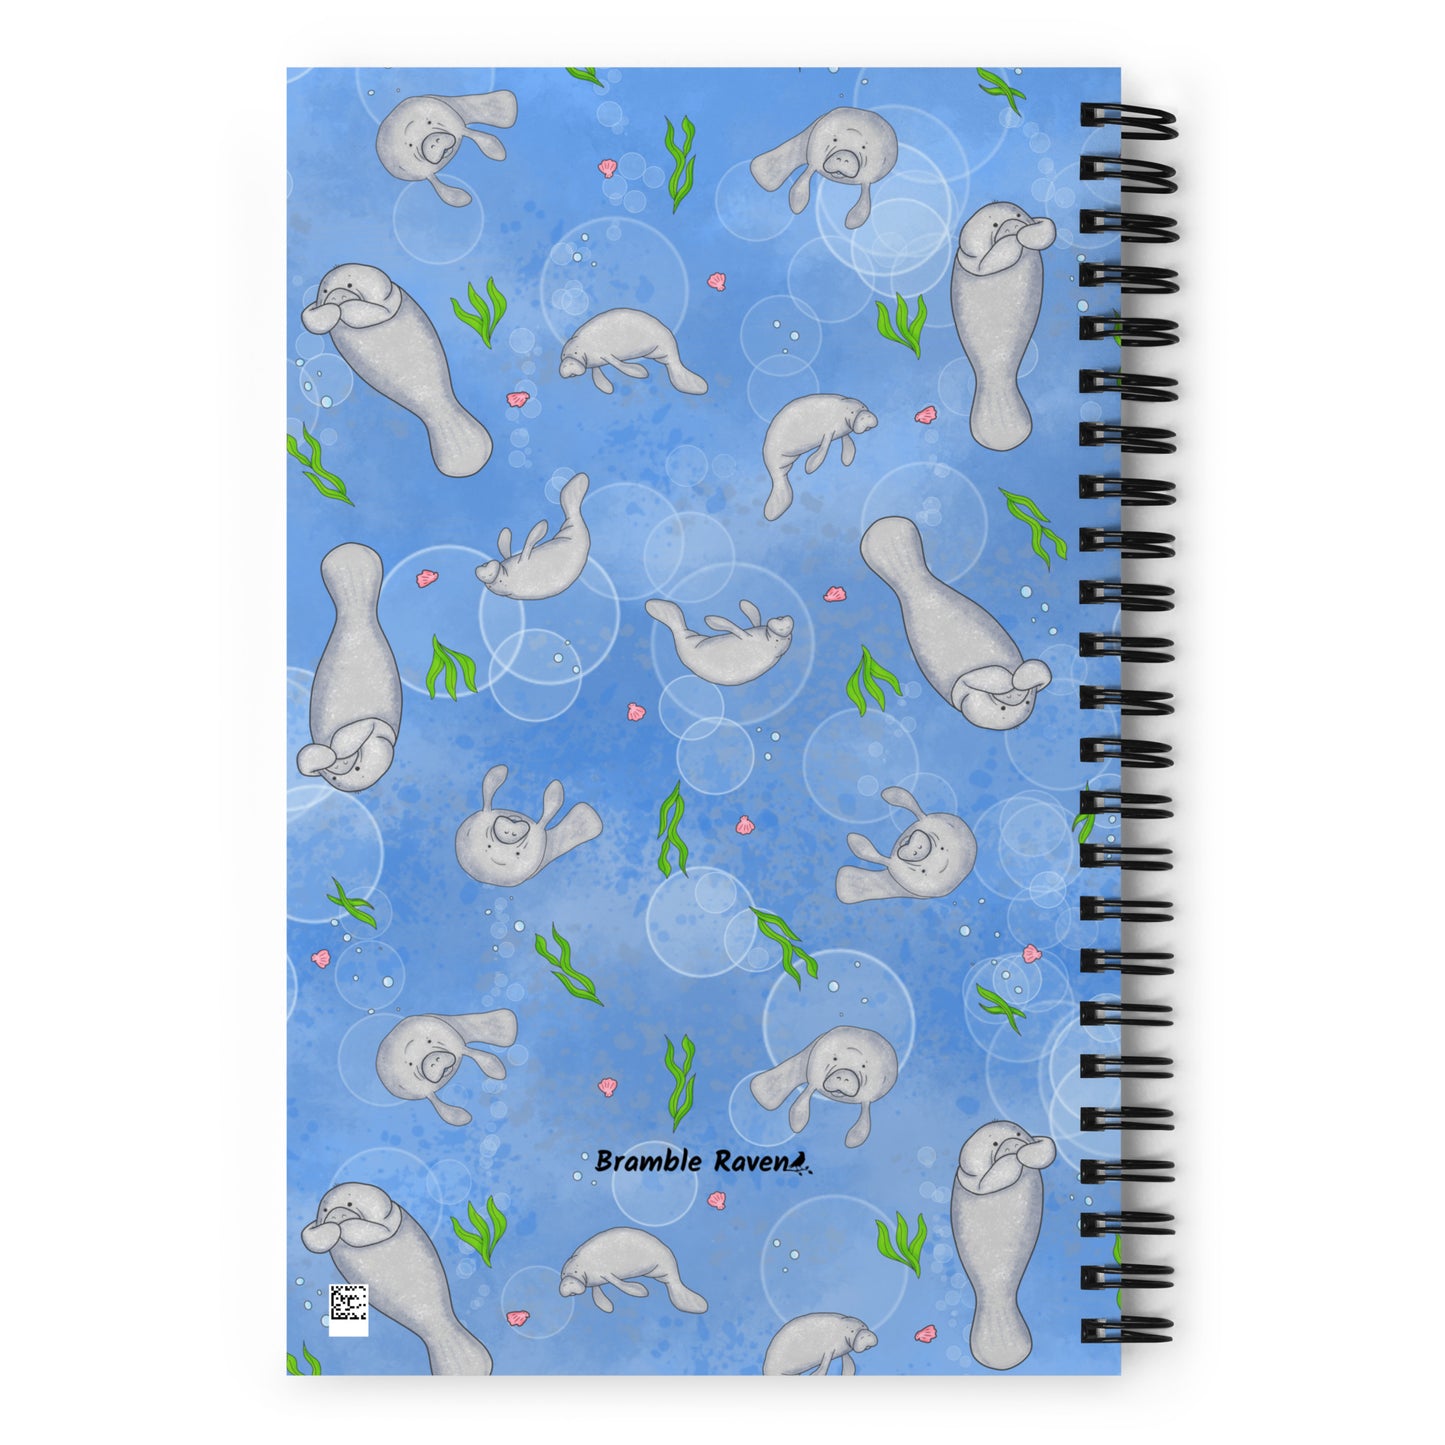 Spiral bound notebook with soft touch cover and 140 dotted pages. Cover features cute illustrated manatees swimming in the water. Measures 5.5 inches by 8.5 inches. Back view of notebook.